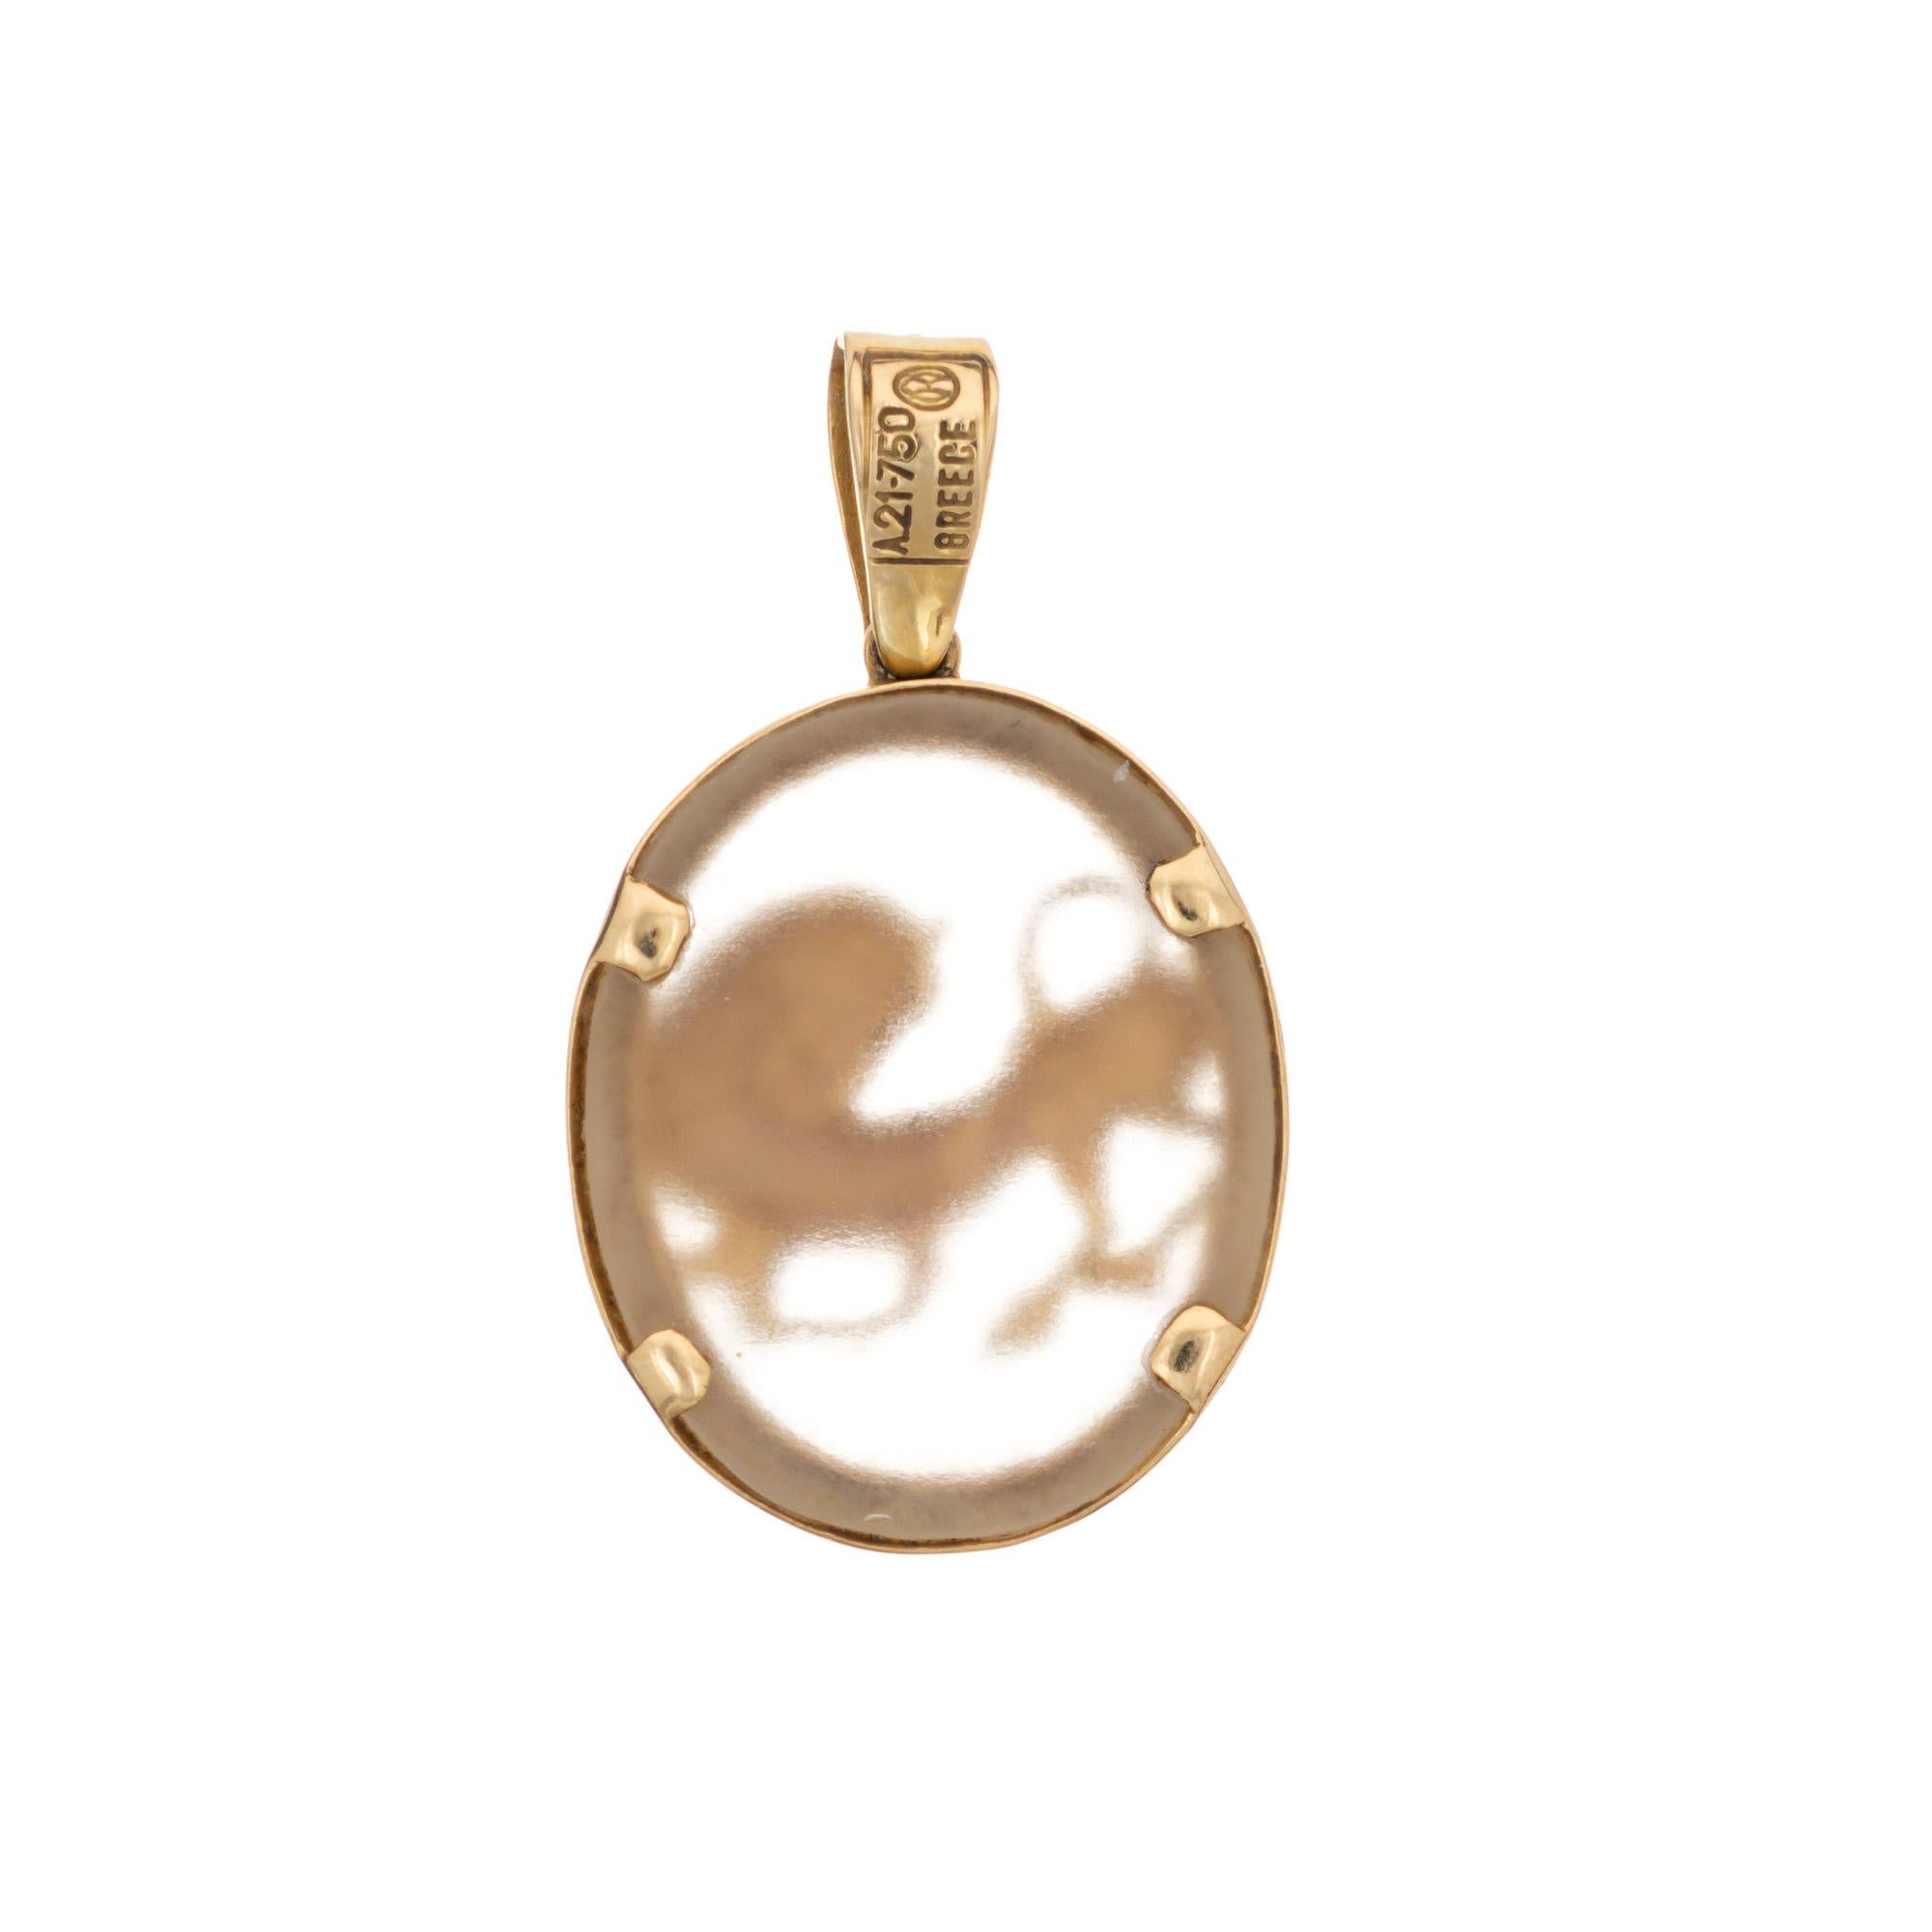 Cabochon Ilias Lalaounis Pendant Frosted Rock Crystal 18k Yellow Gold Animal Motif 